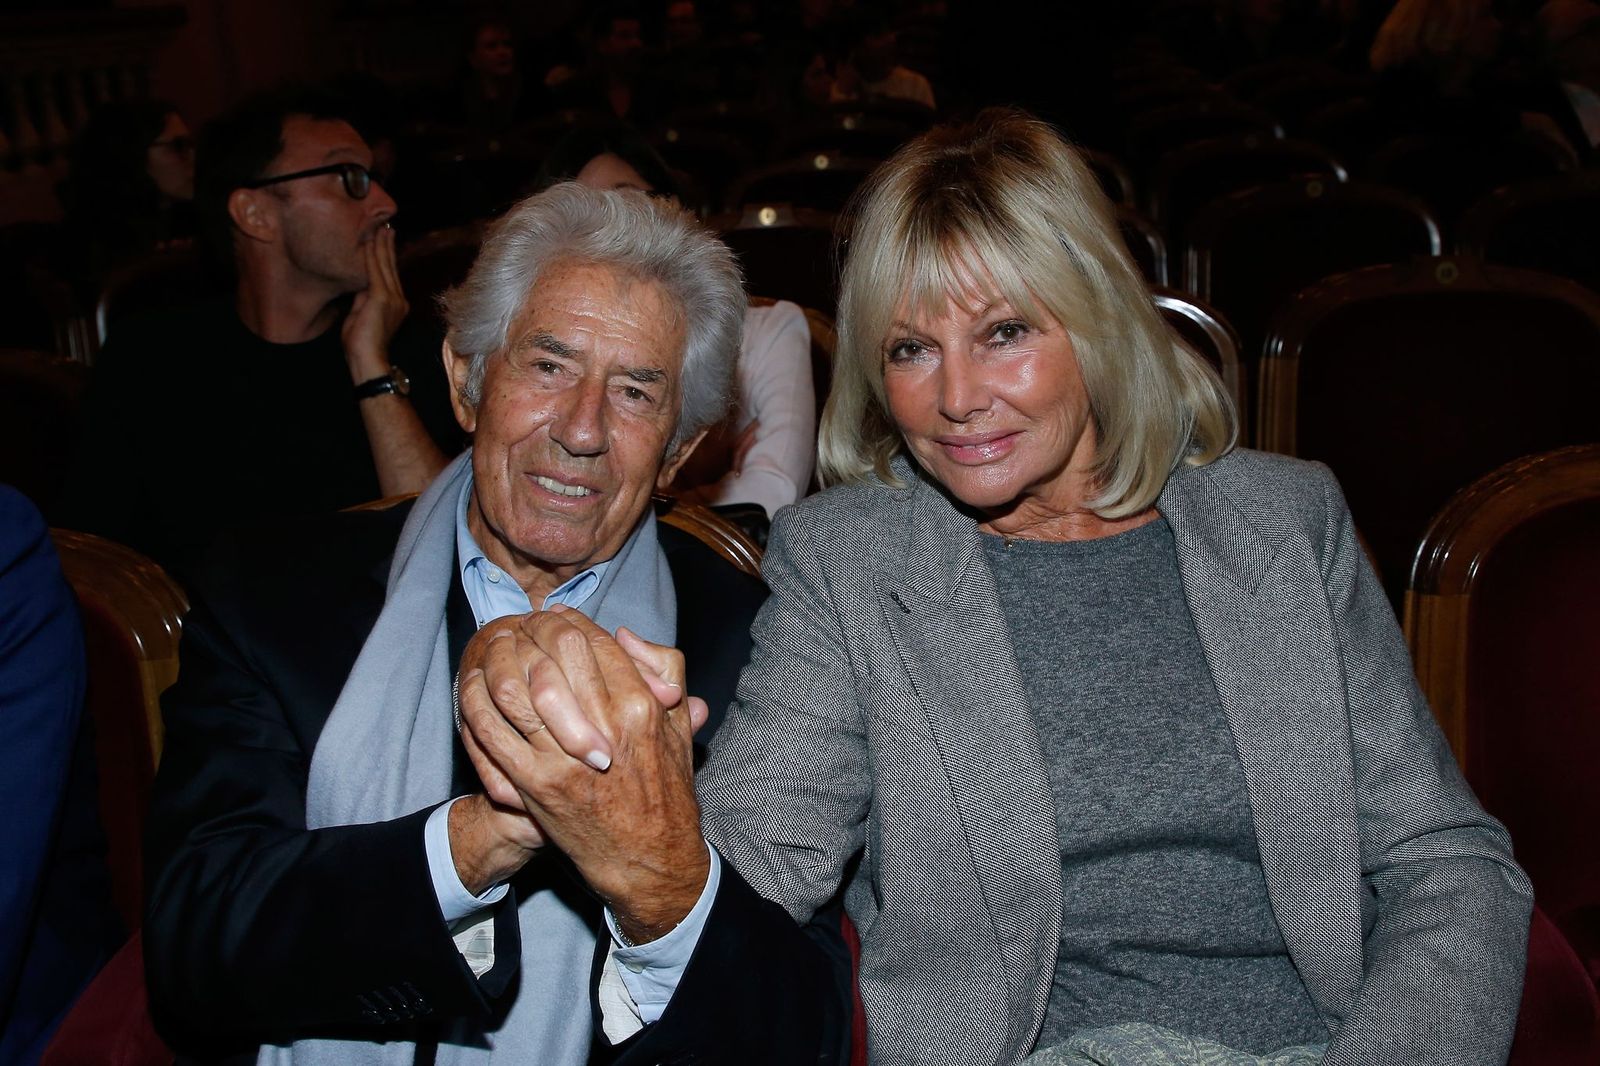 Le journaliste Philippe Gildas et sa compagne Maryse | Photo : Getty Images.